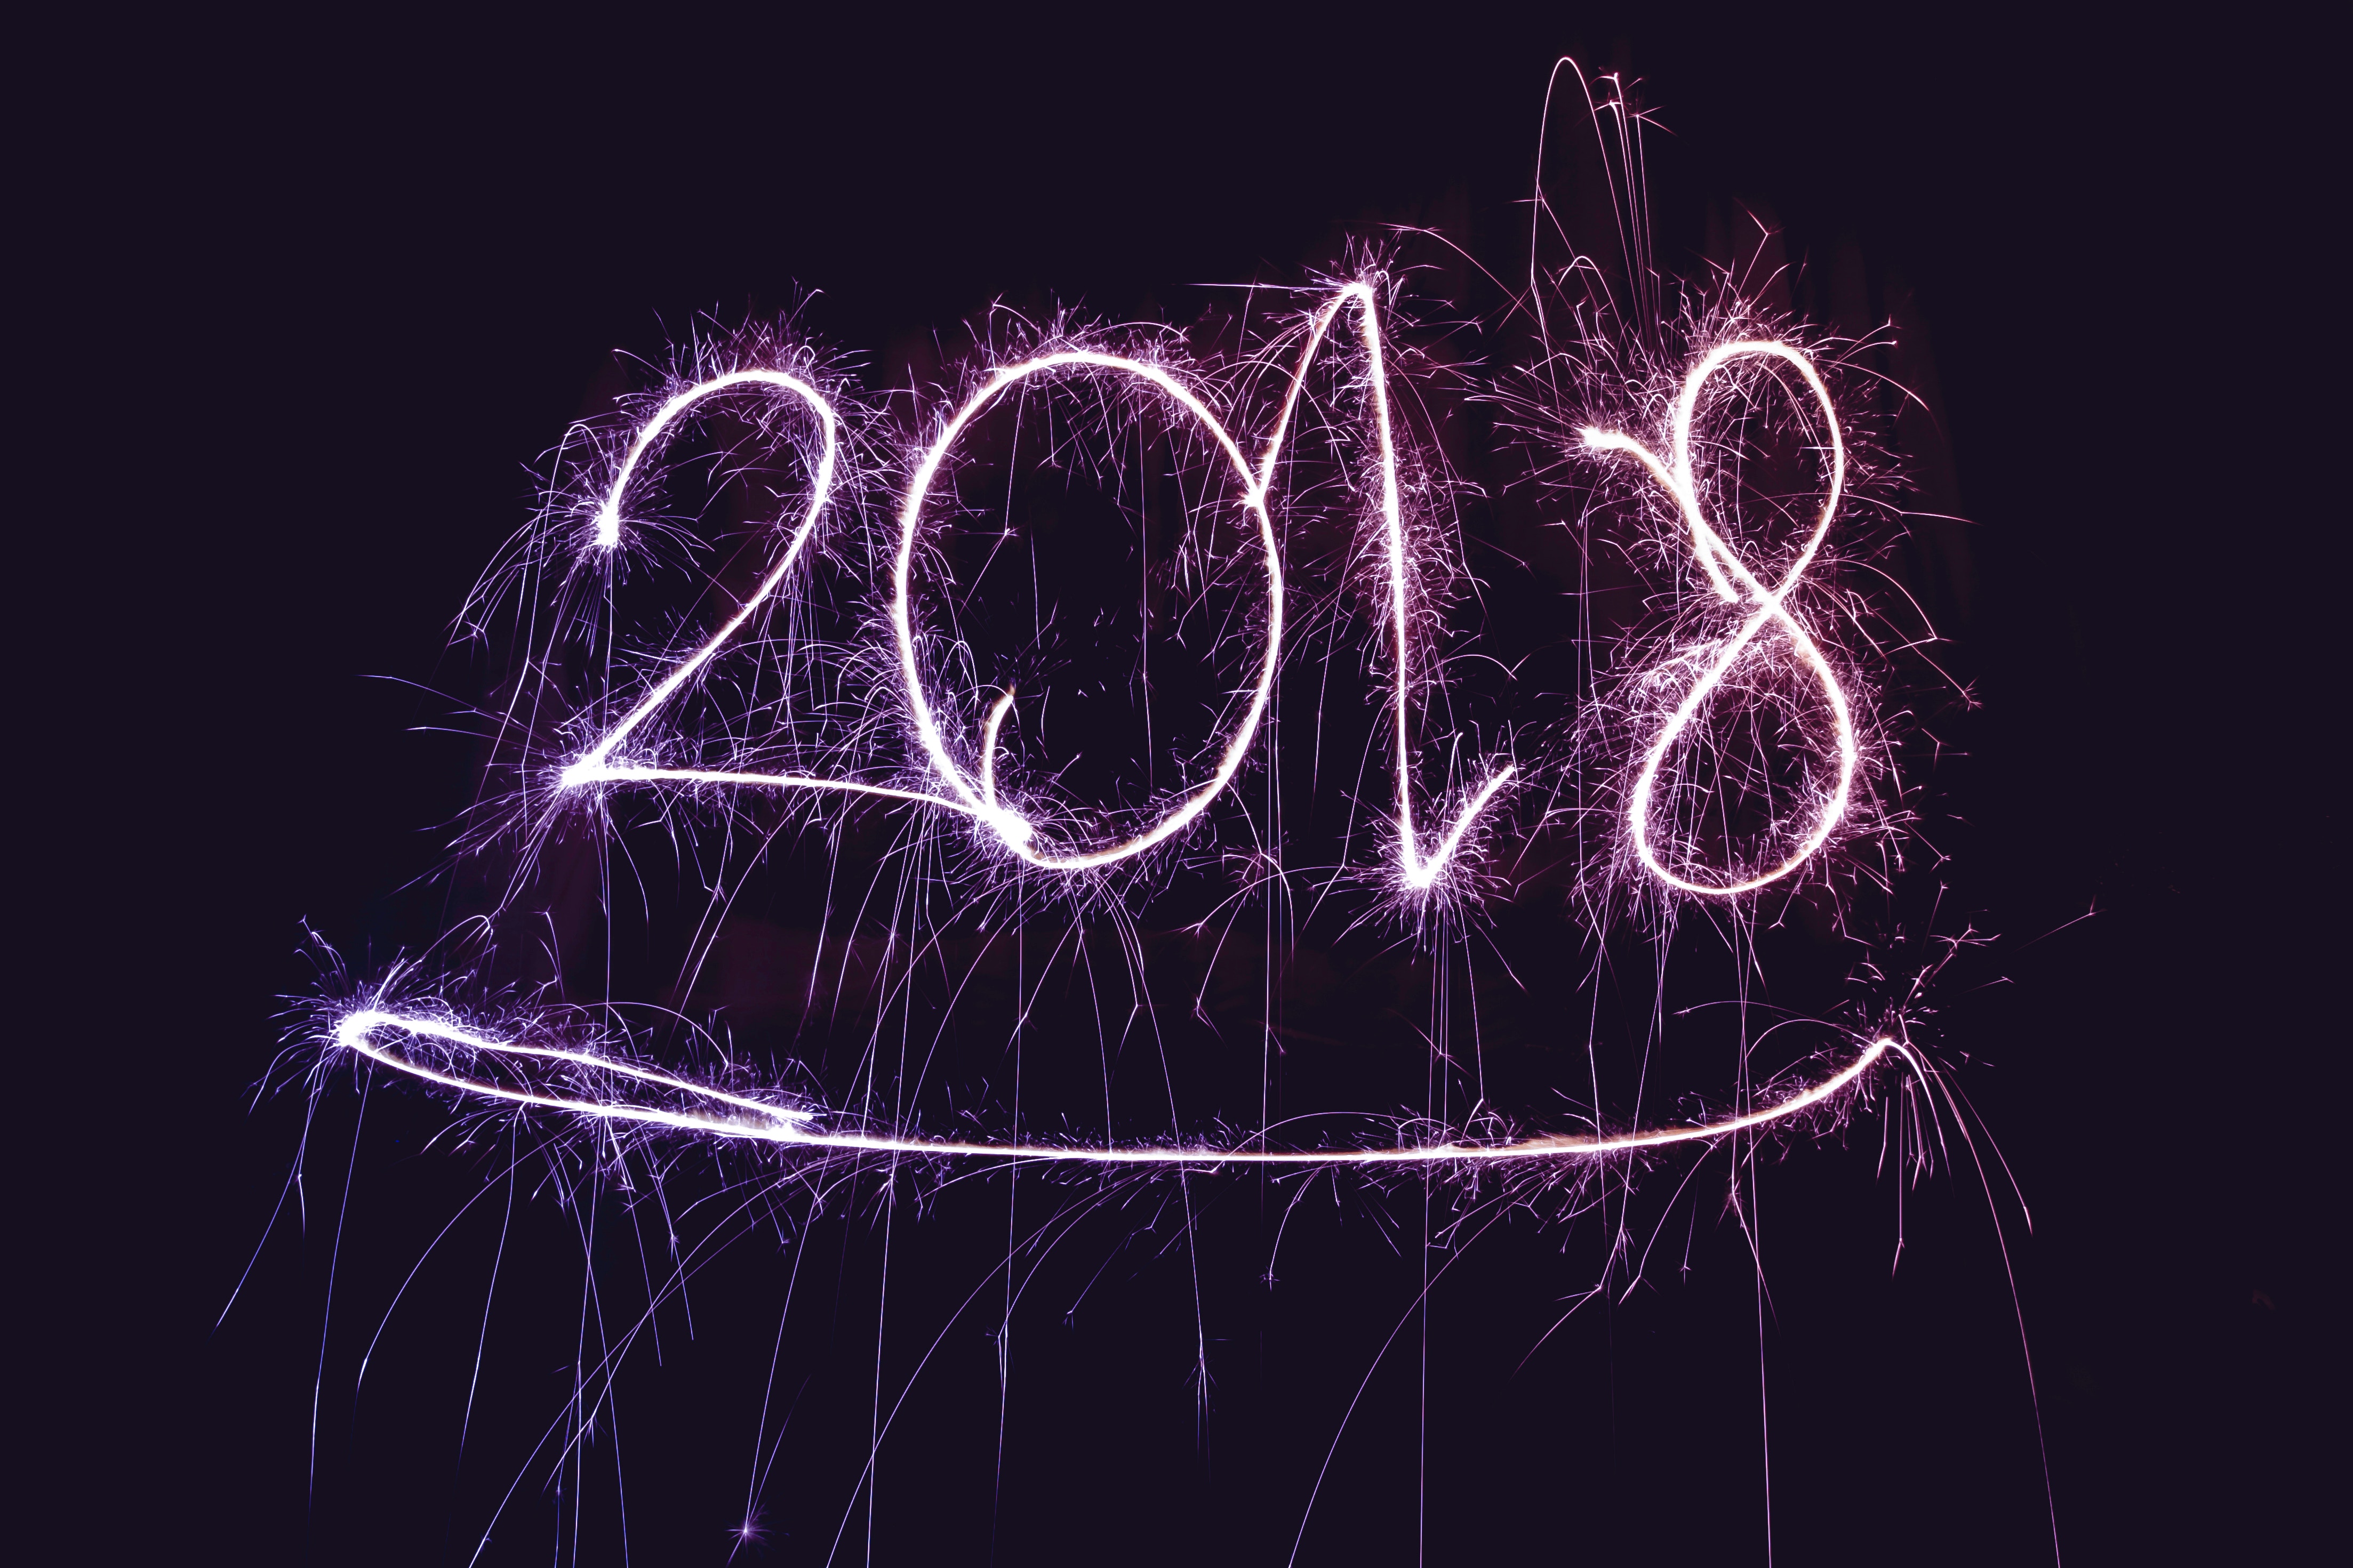 2018 closing thoughts